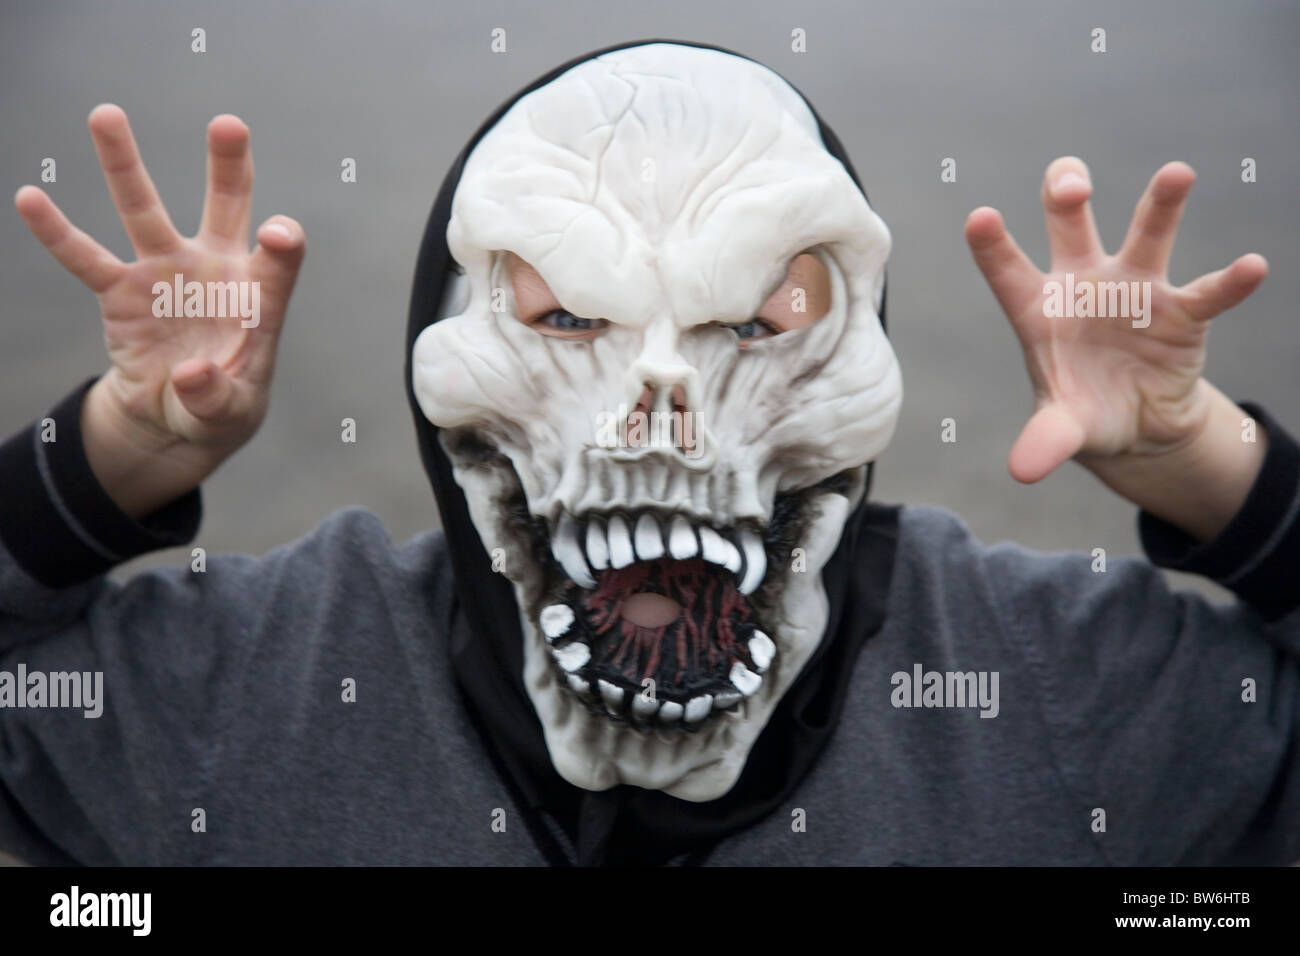 Young boy wearing skeleton Halloween mask with scary pose Stock Photo